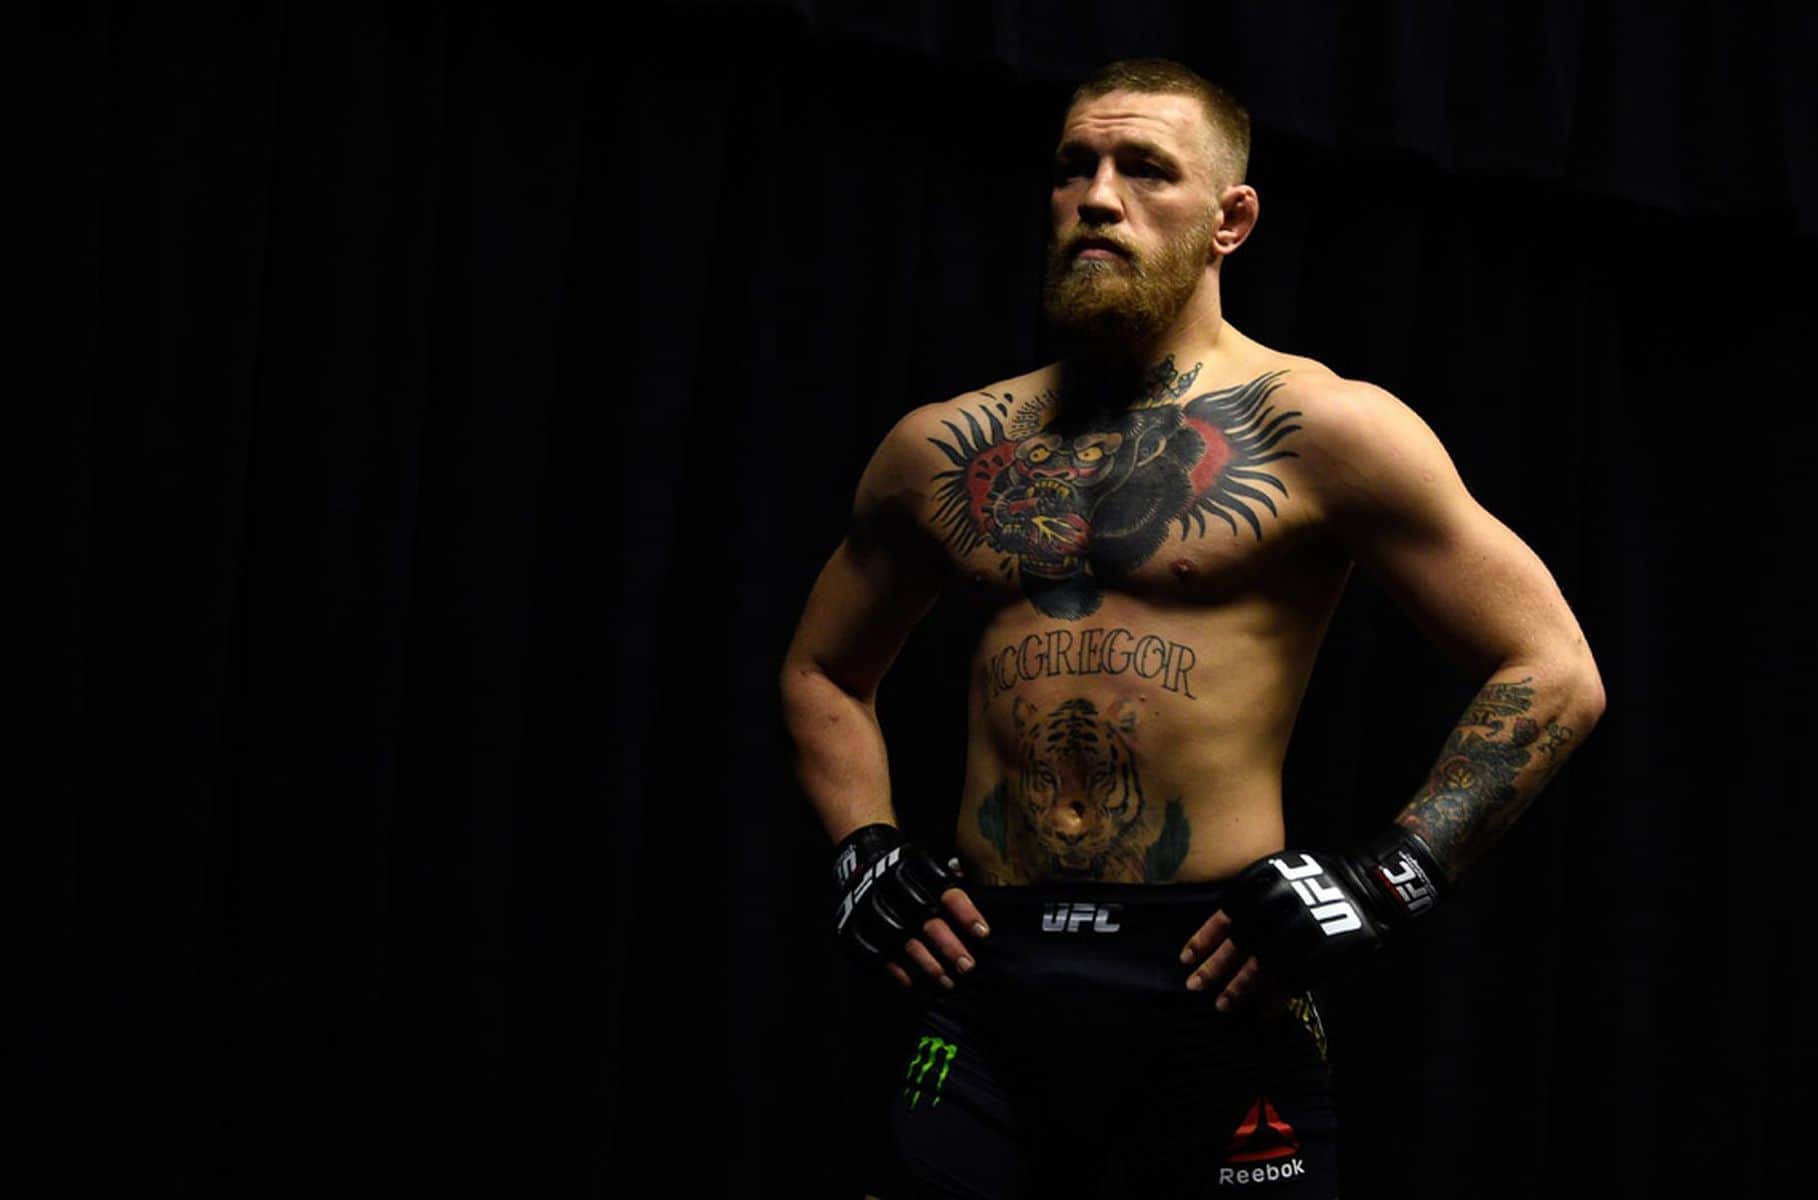 Conor-McGregor-gets-ready-for-his-fight-with-Nate-Diaz